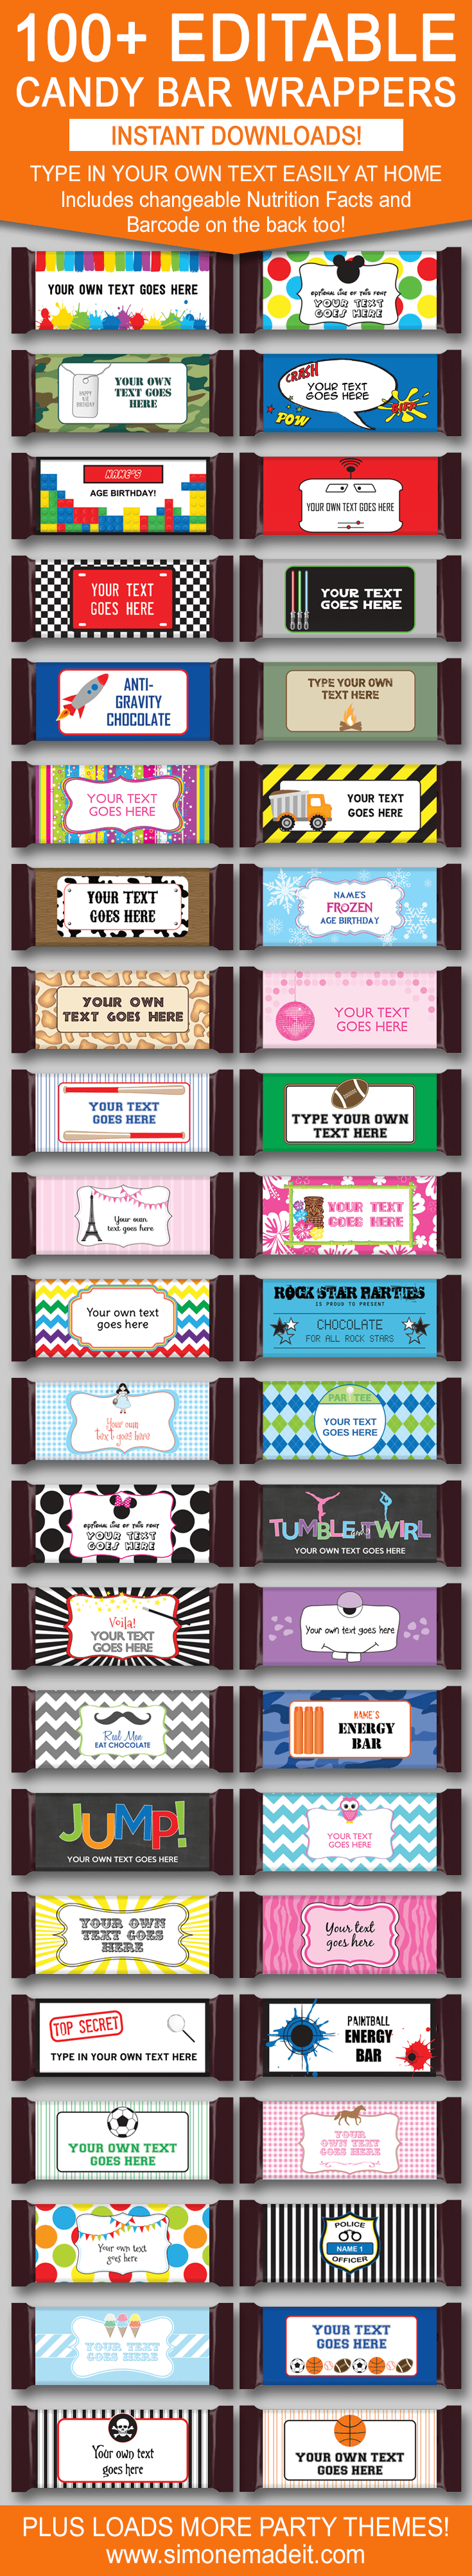 DINOSAUR BIRTHDAY PARTY FAVORS CANDY BAR HERSHEY BAR WRAPPERS 